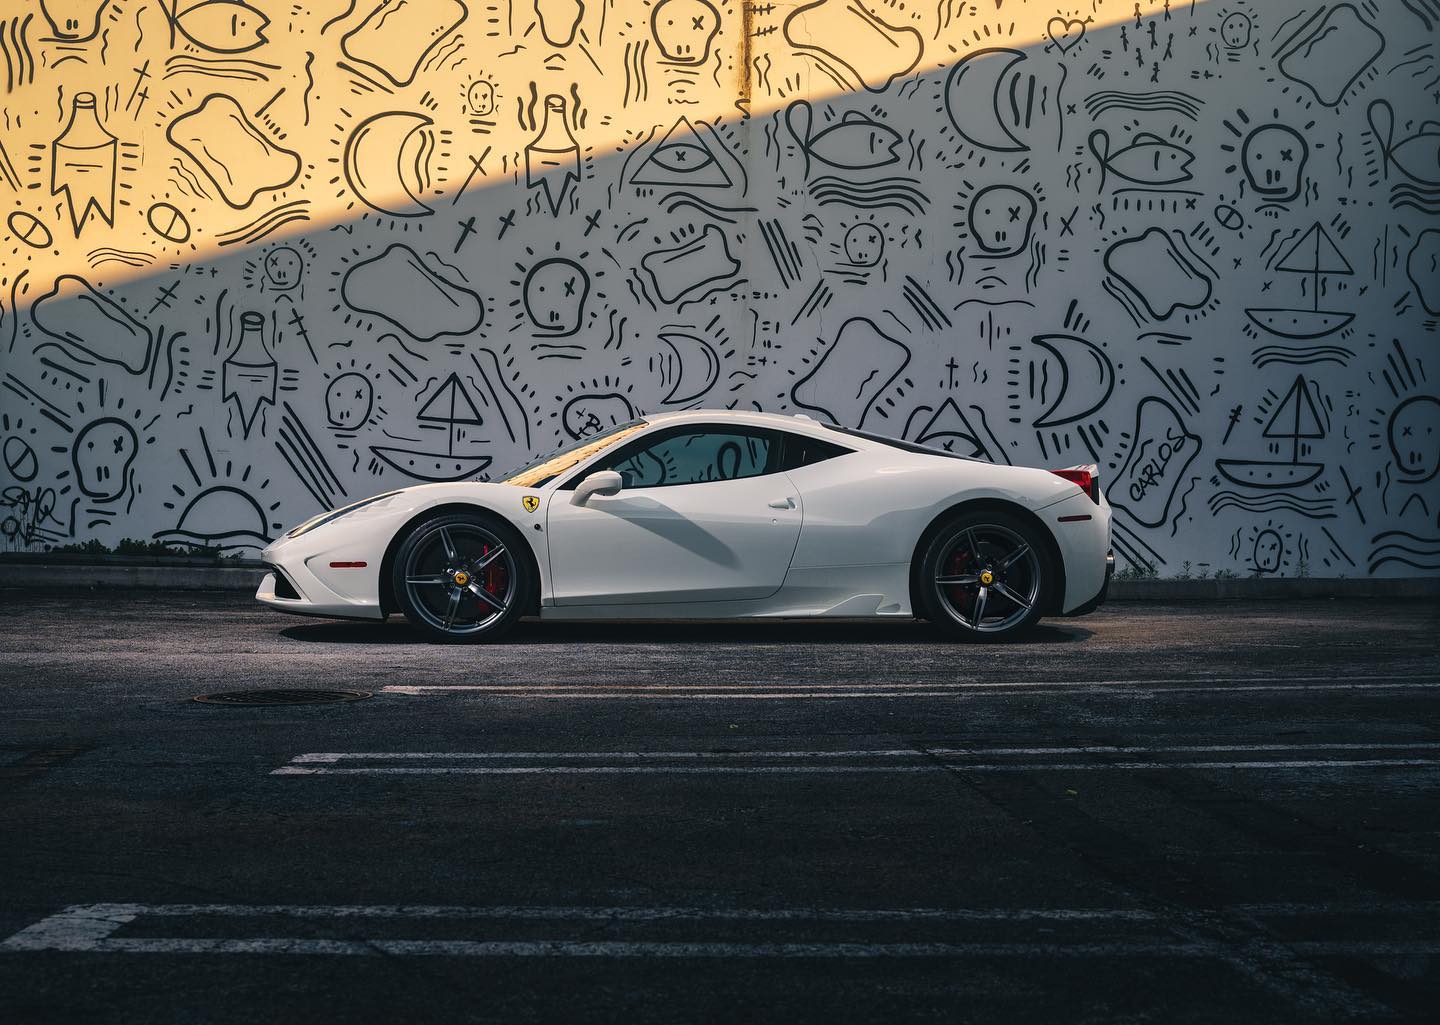 Modificata’s manual-swapped 458 Speciale really shifts